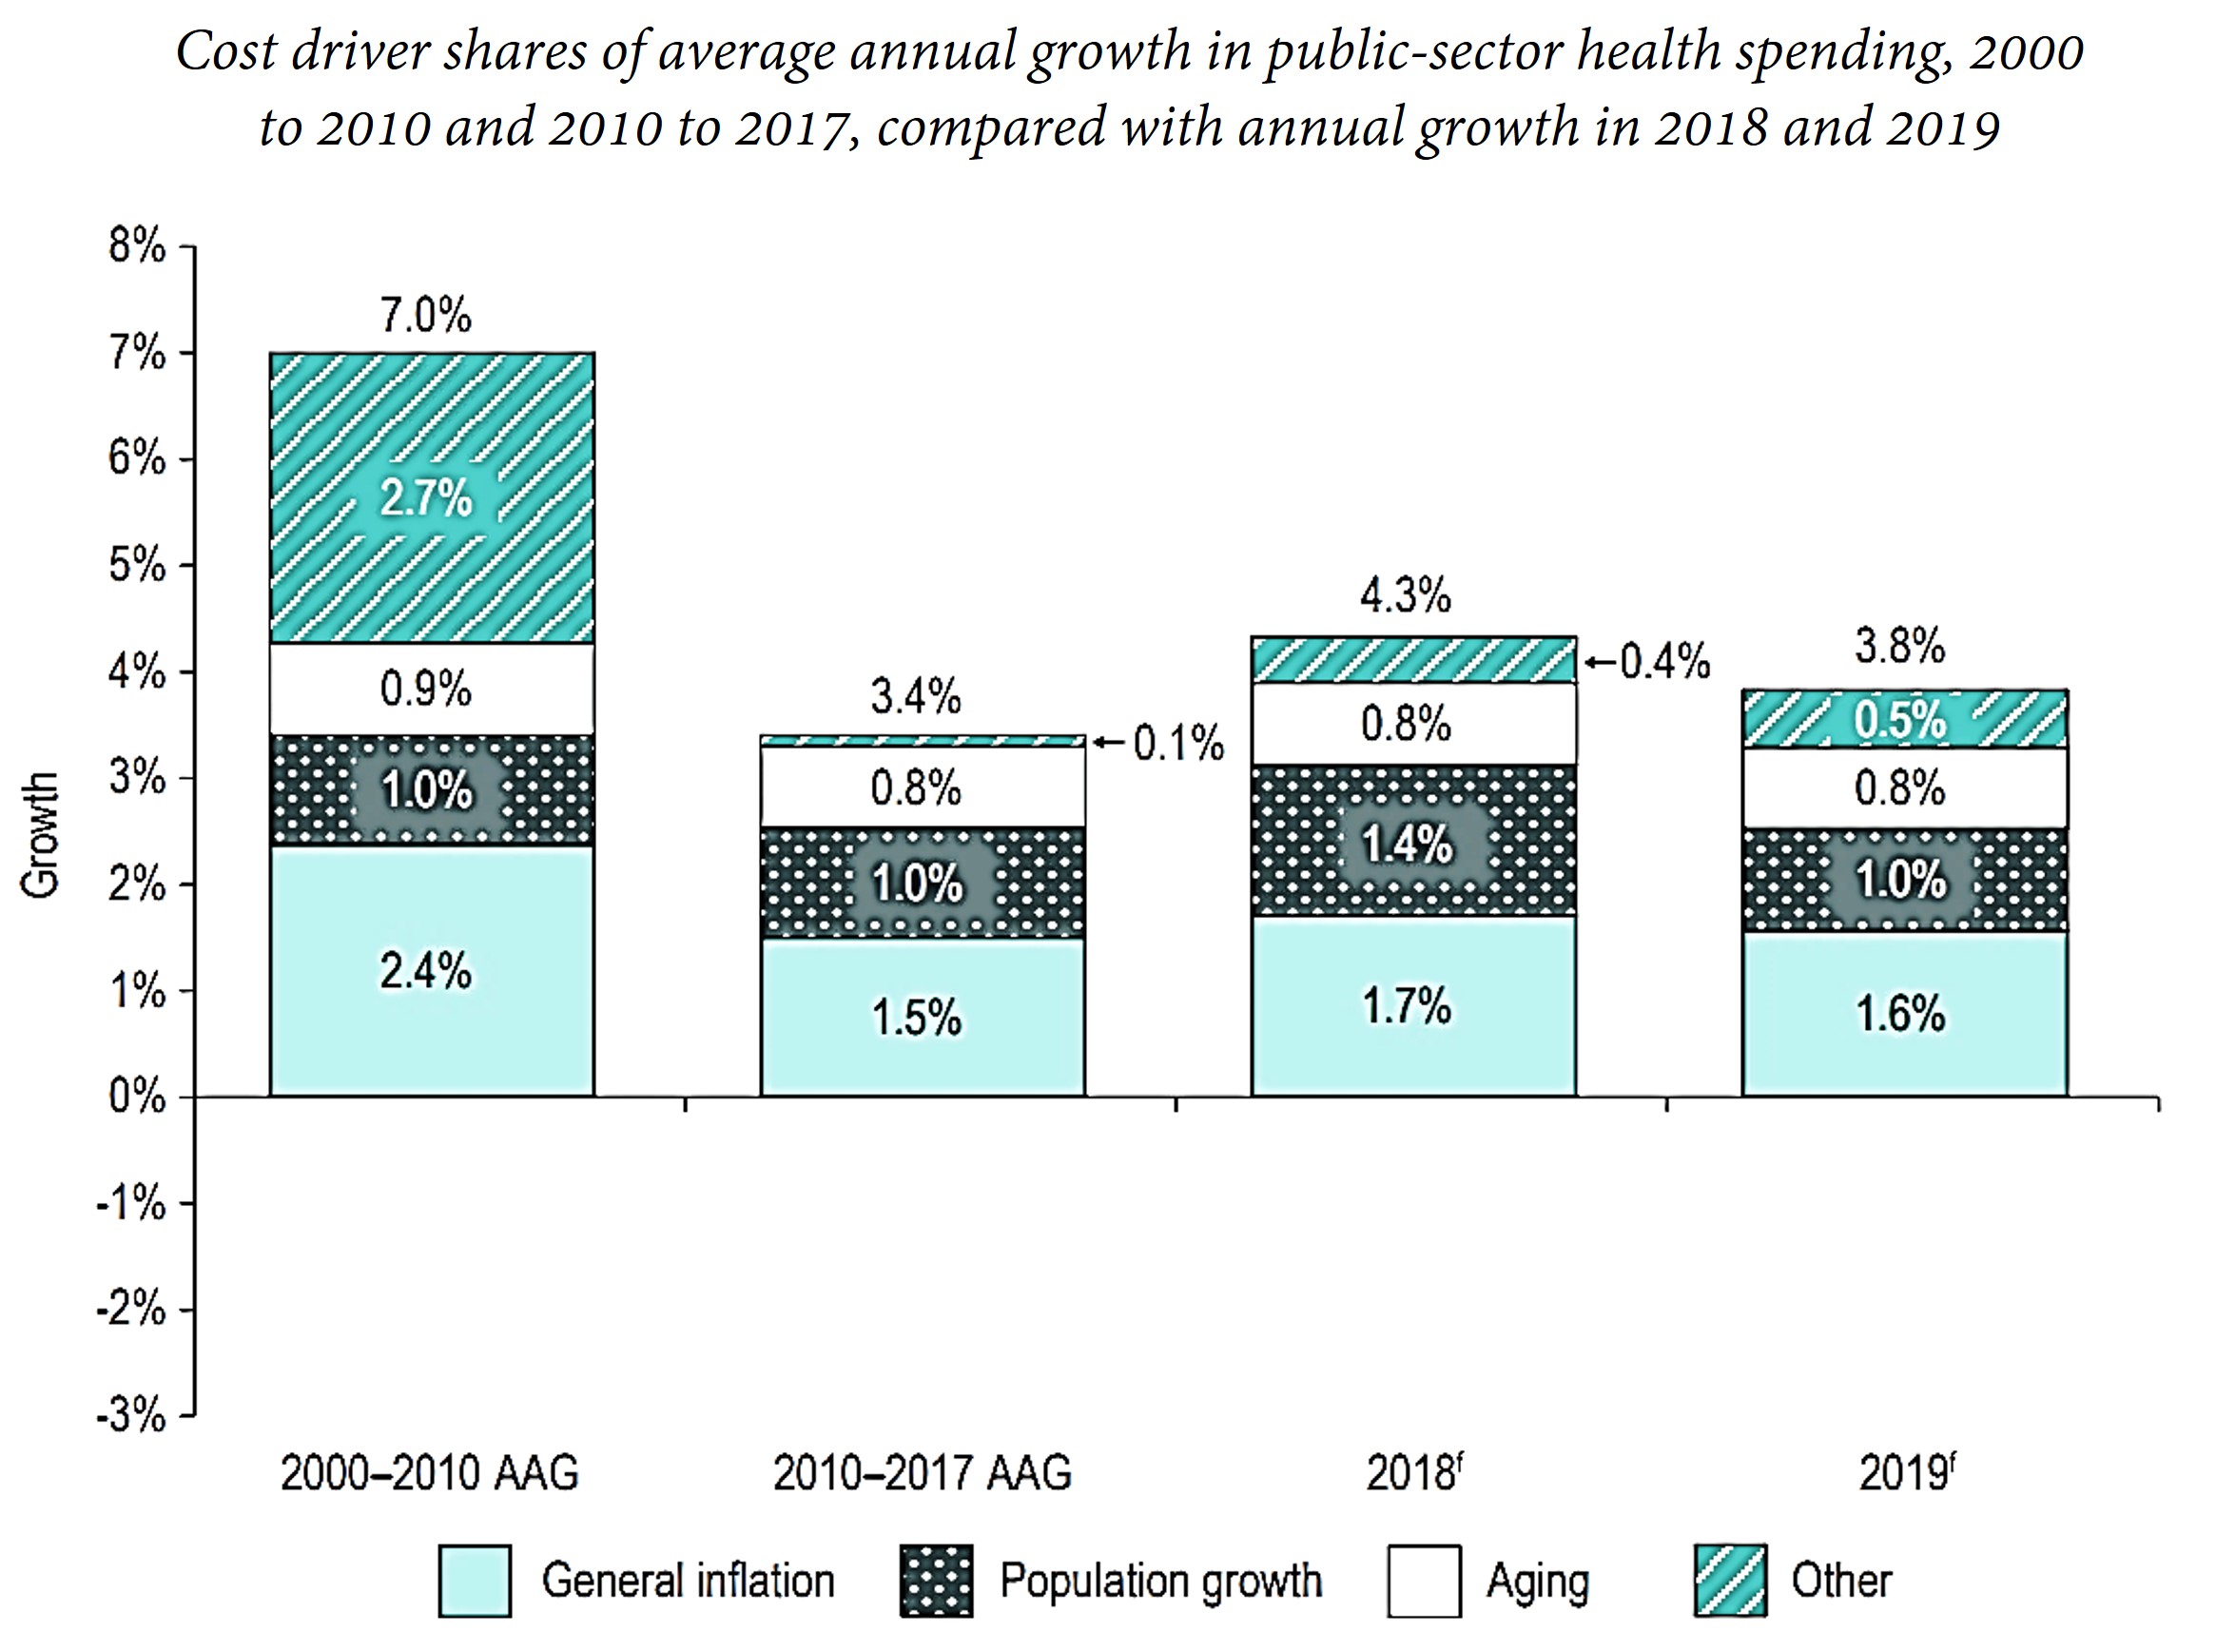 Average annual growth in public health care spending in Canada grew 7% between 2000-2010, but only 0.9% was due to aging; 1% was due to population growth, 2.4% was inflation, and 2.7% is unexplained. (There was a SARS epidemic in 2003.) Health care costs grew 3.4% between 2010 and 2017: 1.5% from inflation, 1% from population growth, and 0.8% from aging. In 2018 and 2019, aging was responsible for increasing health care costs by 0.8%.